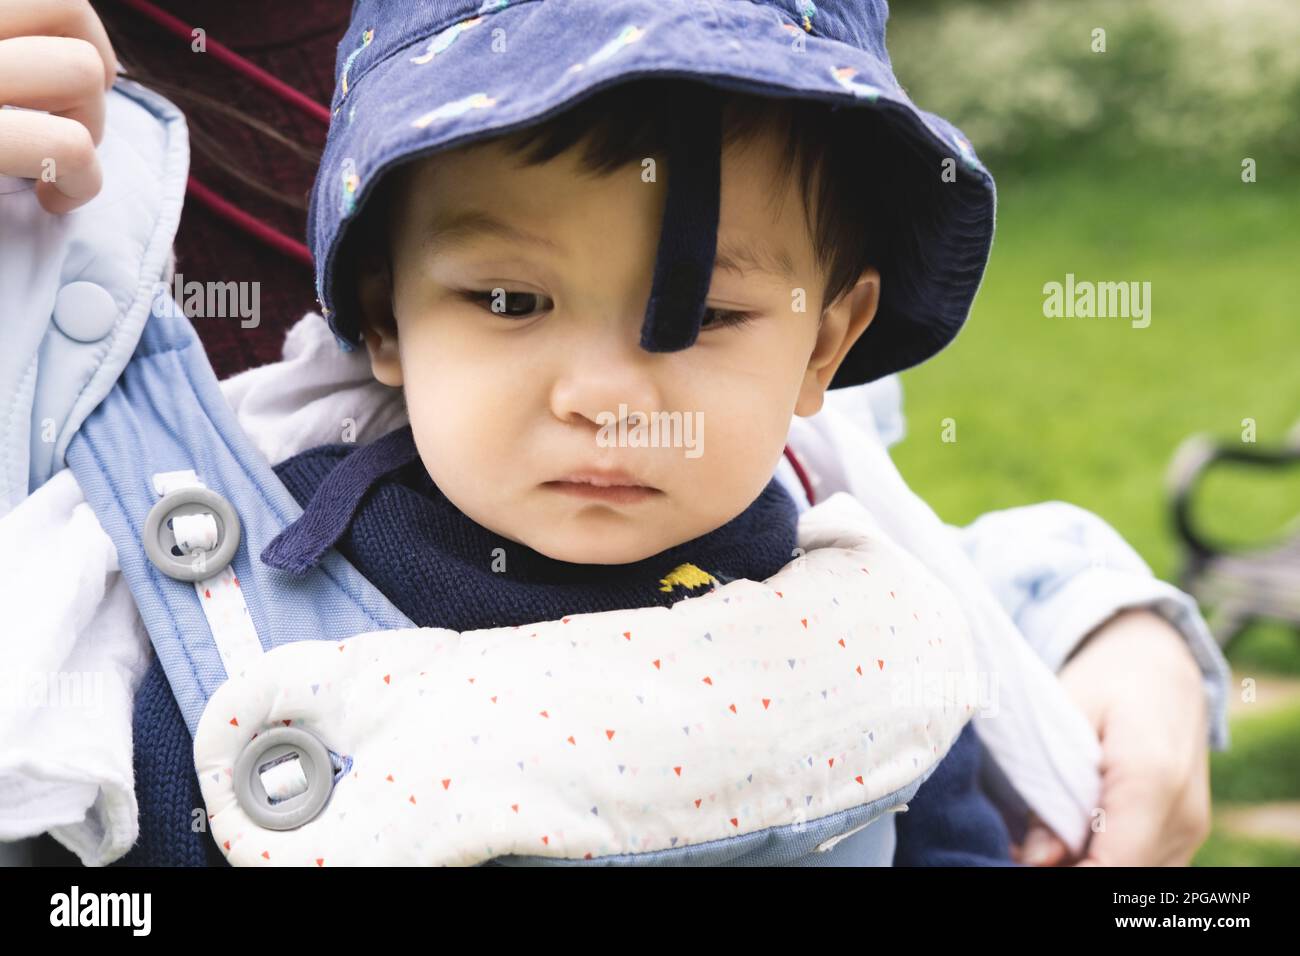 Close-up photo of a male infant carried by his unrecognizable parent on a baby carrier wearing a blue misplaced hat. He is sad and looking down, feeli Stock Photo